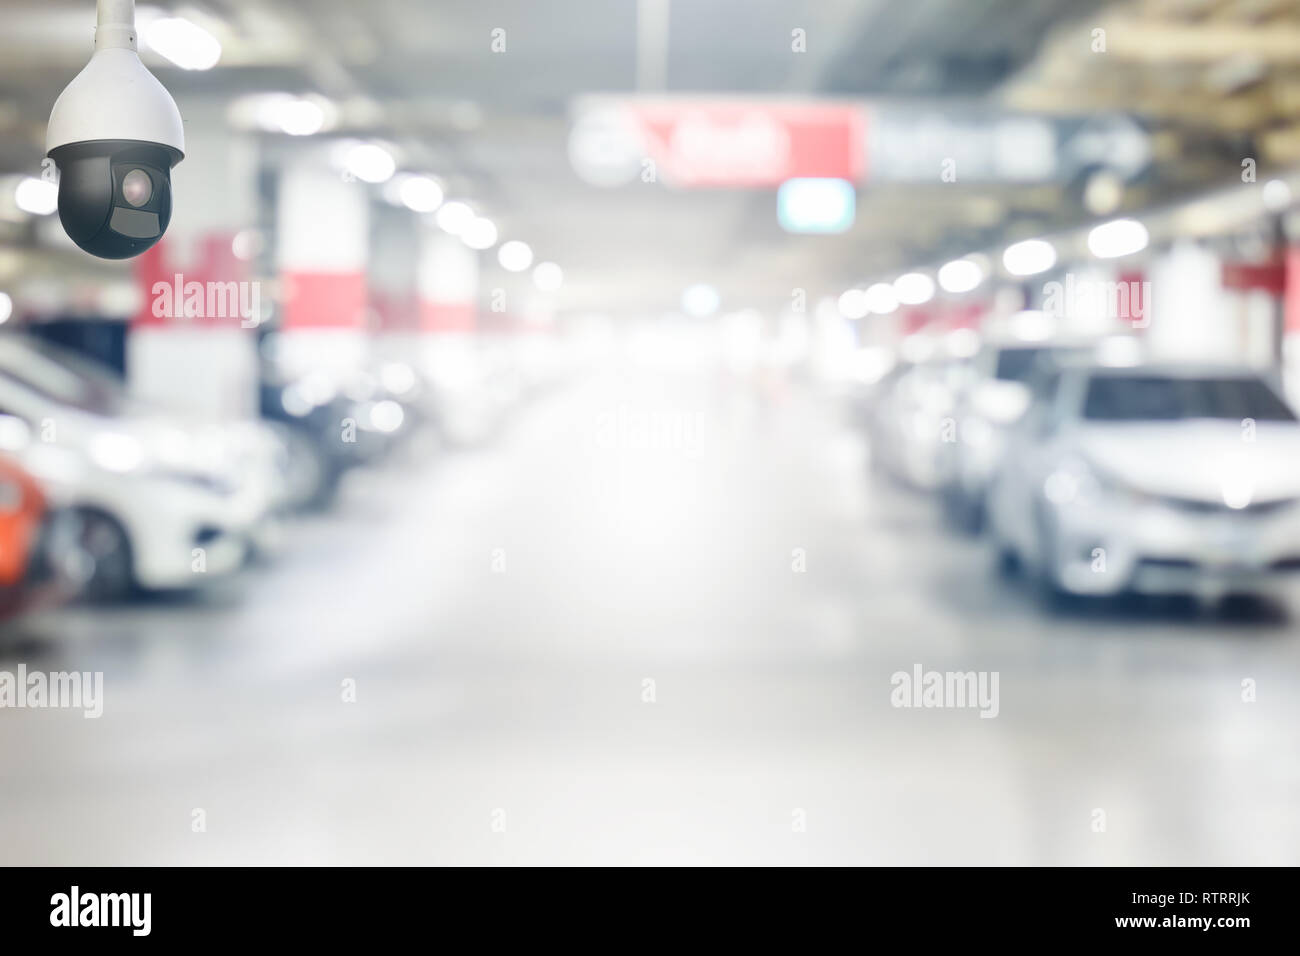 cctv security camera on blur underground cars parking garage with light on exit way use as background Stock Photo